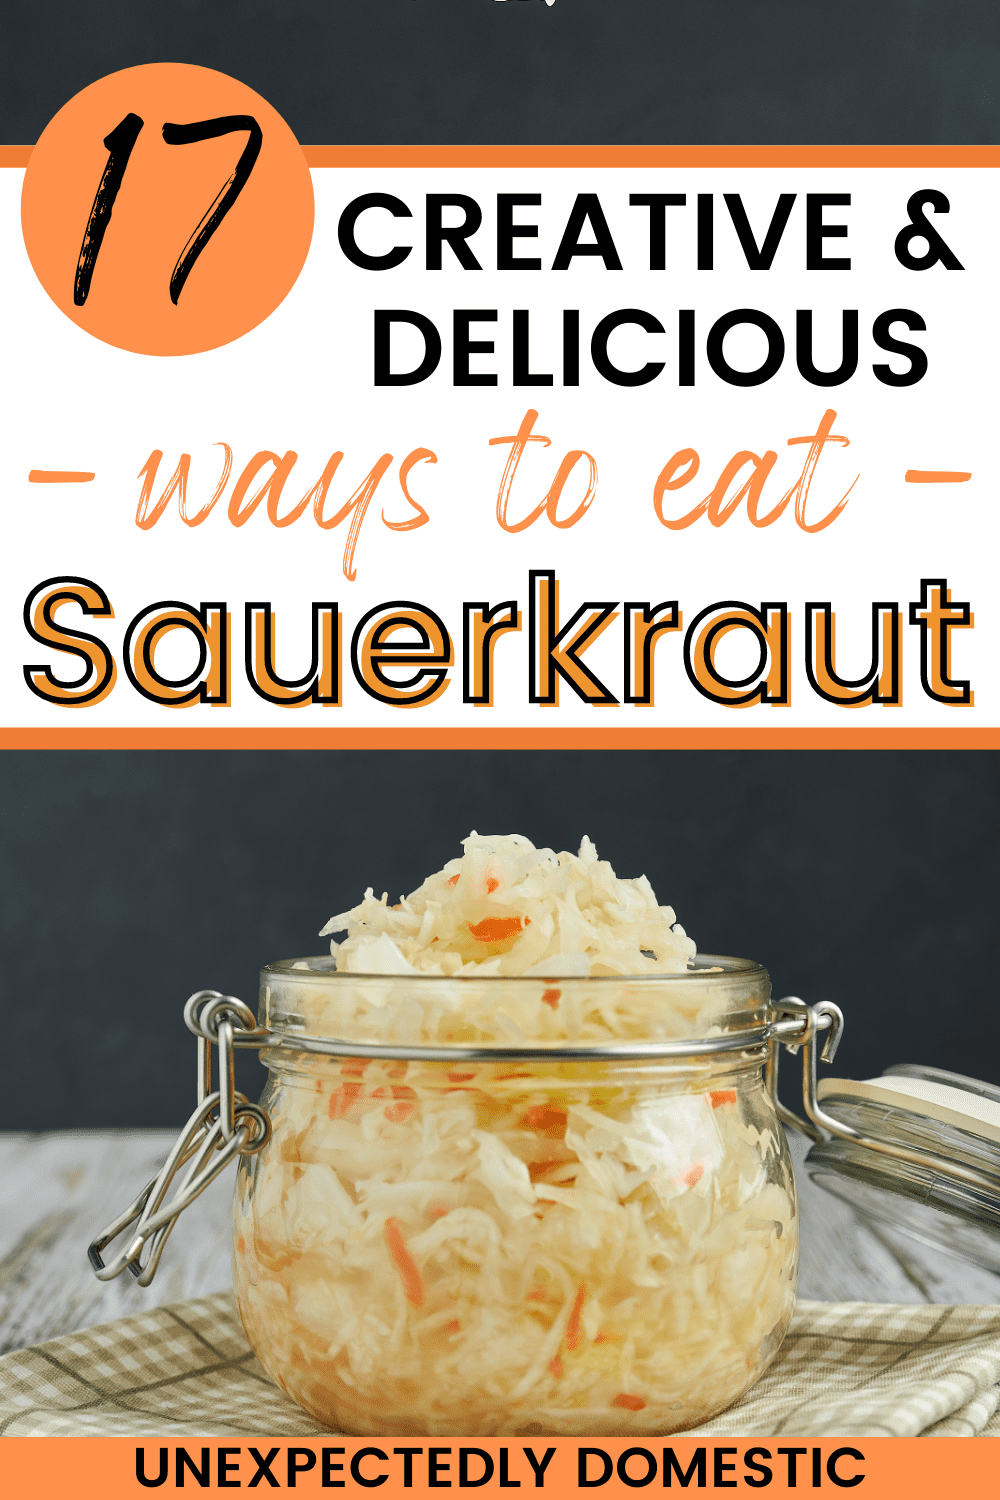 What to eat with sauerkraut! Here are a variety of tasty sauerkraut recipe ideas, what to do with it, and exactly how to serve it!